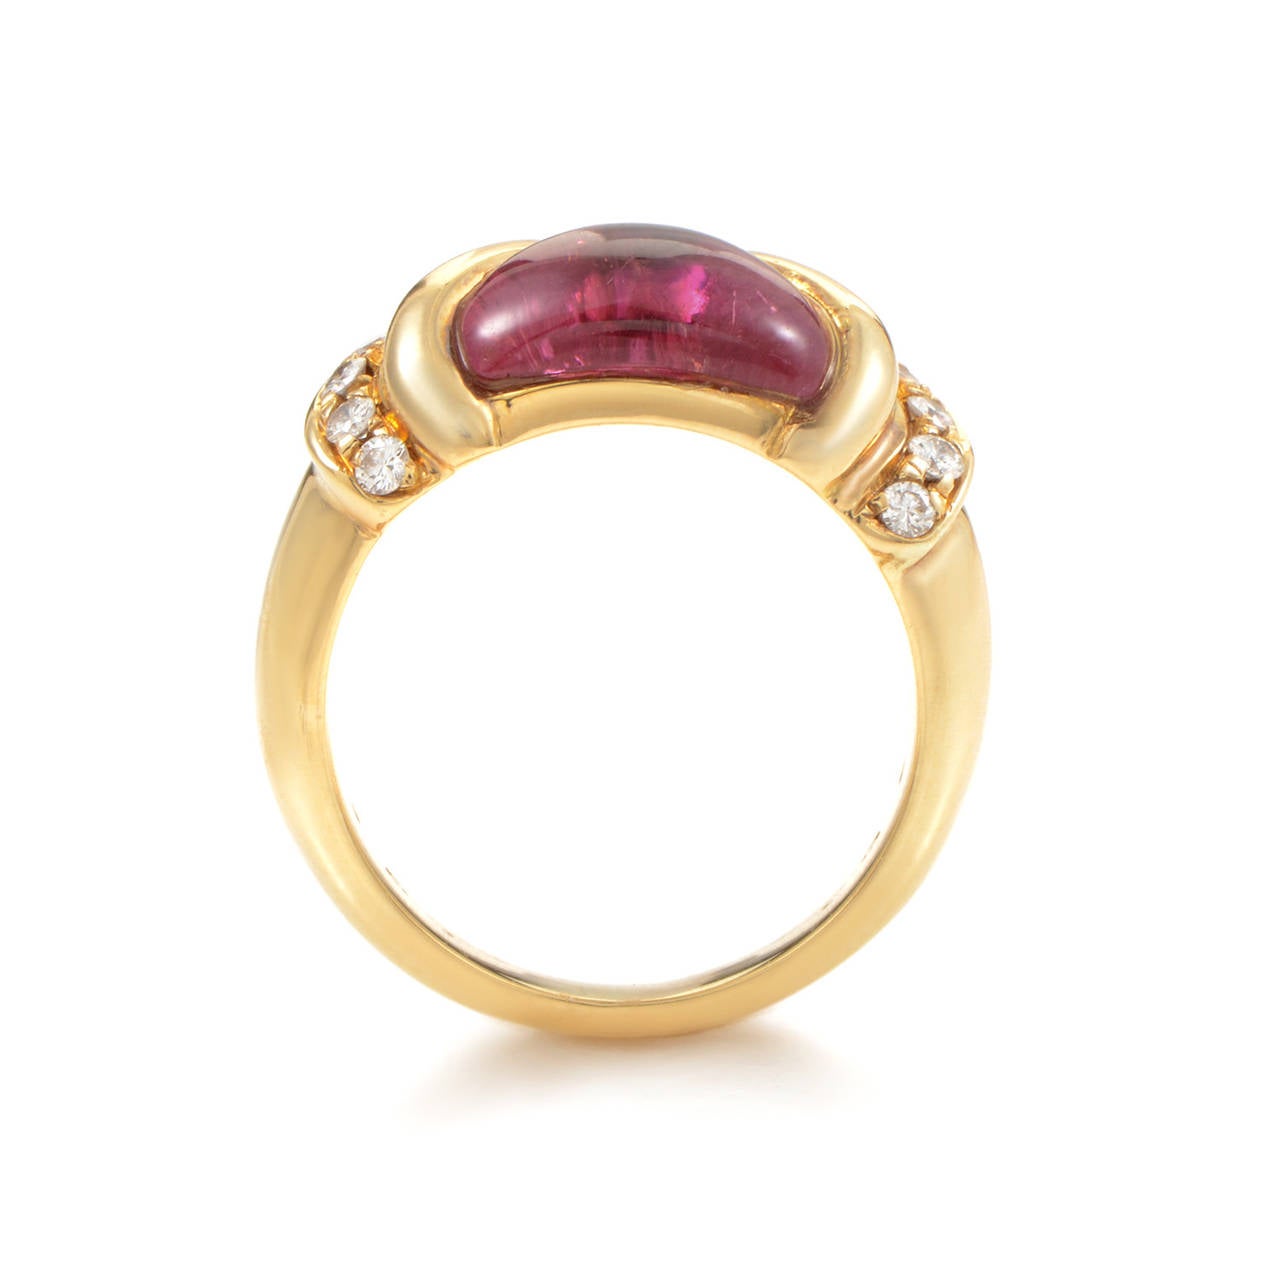 This ring from Bulgari has a vibrant design that is is made only more spectacular by the combination of a colored gemstone and diamonds. The ring is made of 18K yellow gold and is set with a pink tourmaline stone. Lastly, the bezel is accented with